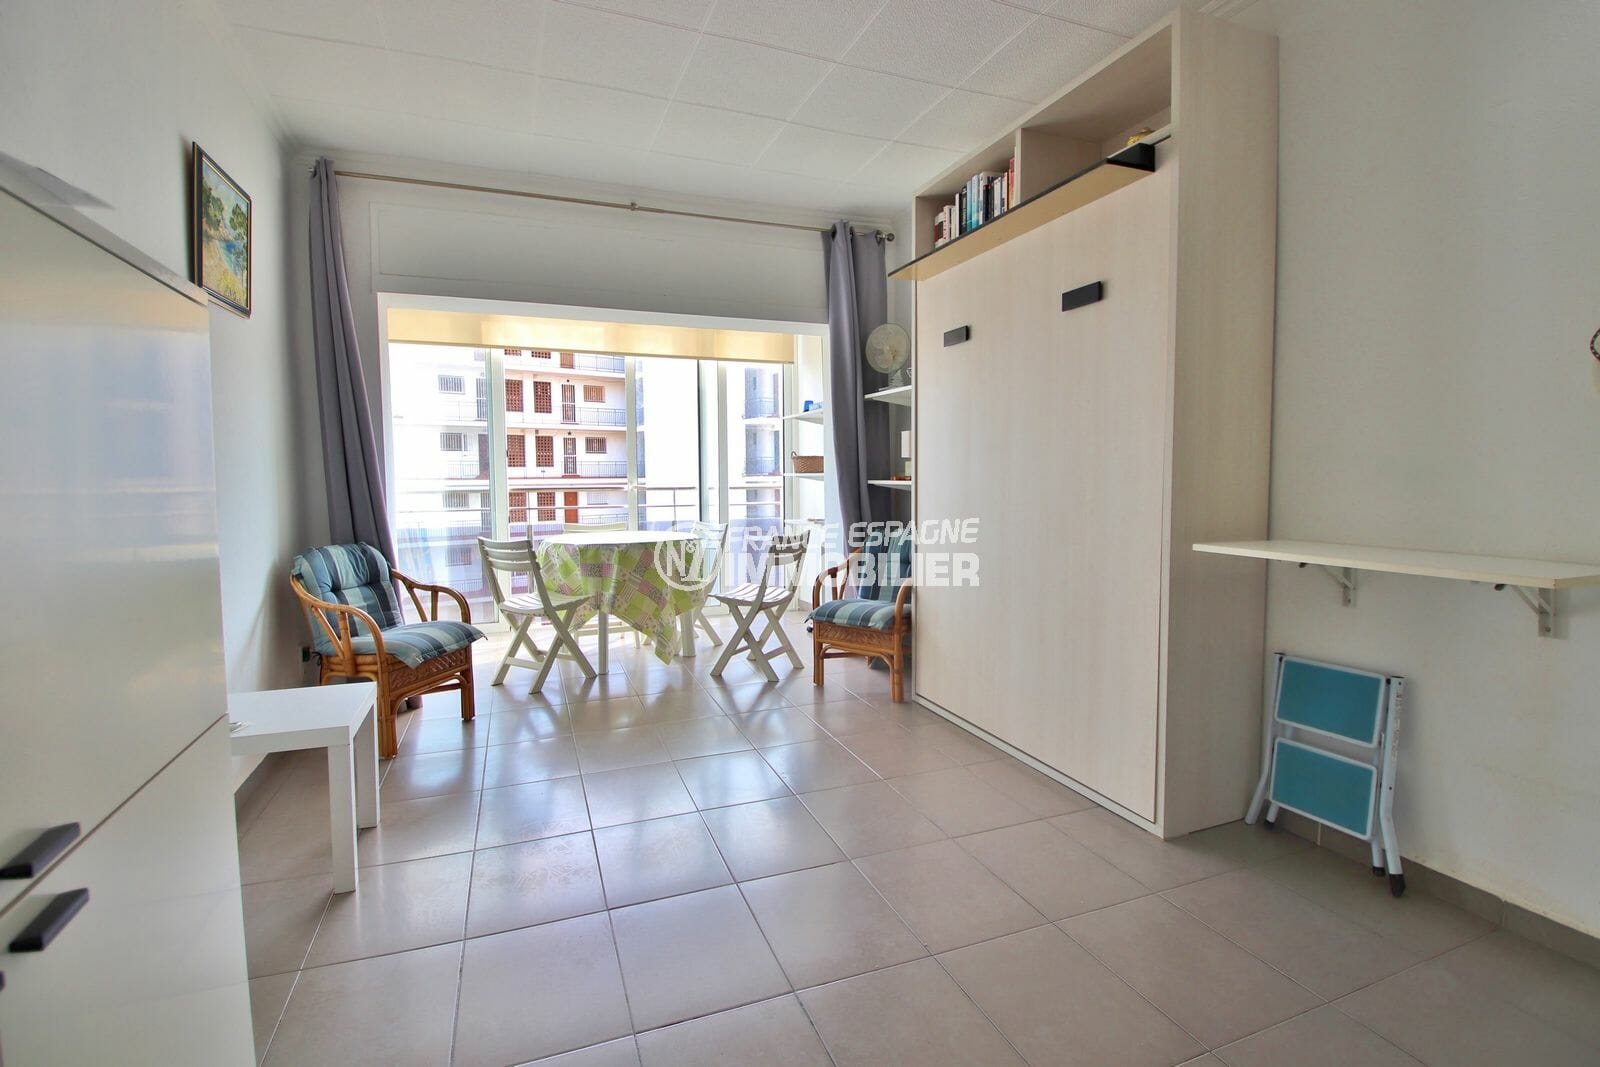 Roses - studio apartment, 50 m from Salatar beach, shared parking lot